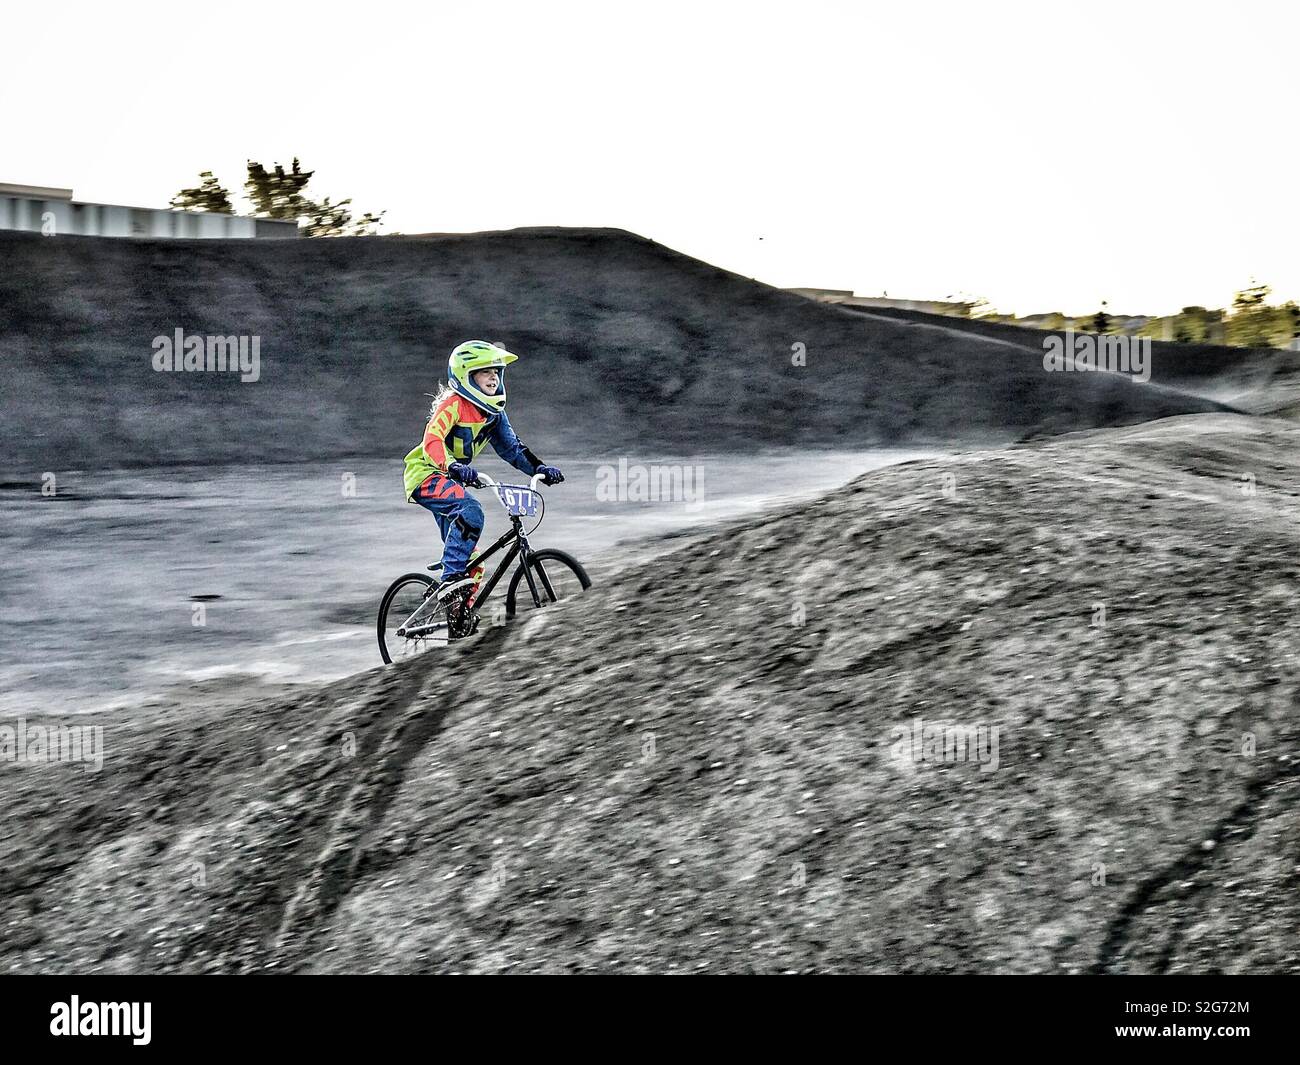 A girl races her BMX bike at a gritty dirt and asphalt track. Stock Photo